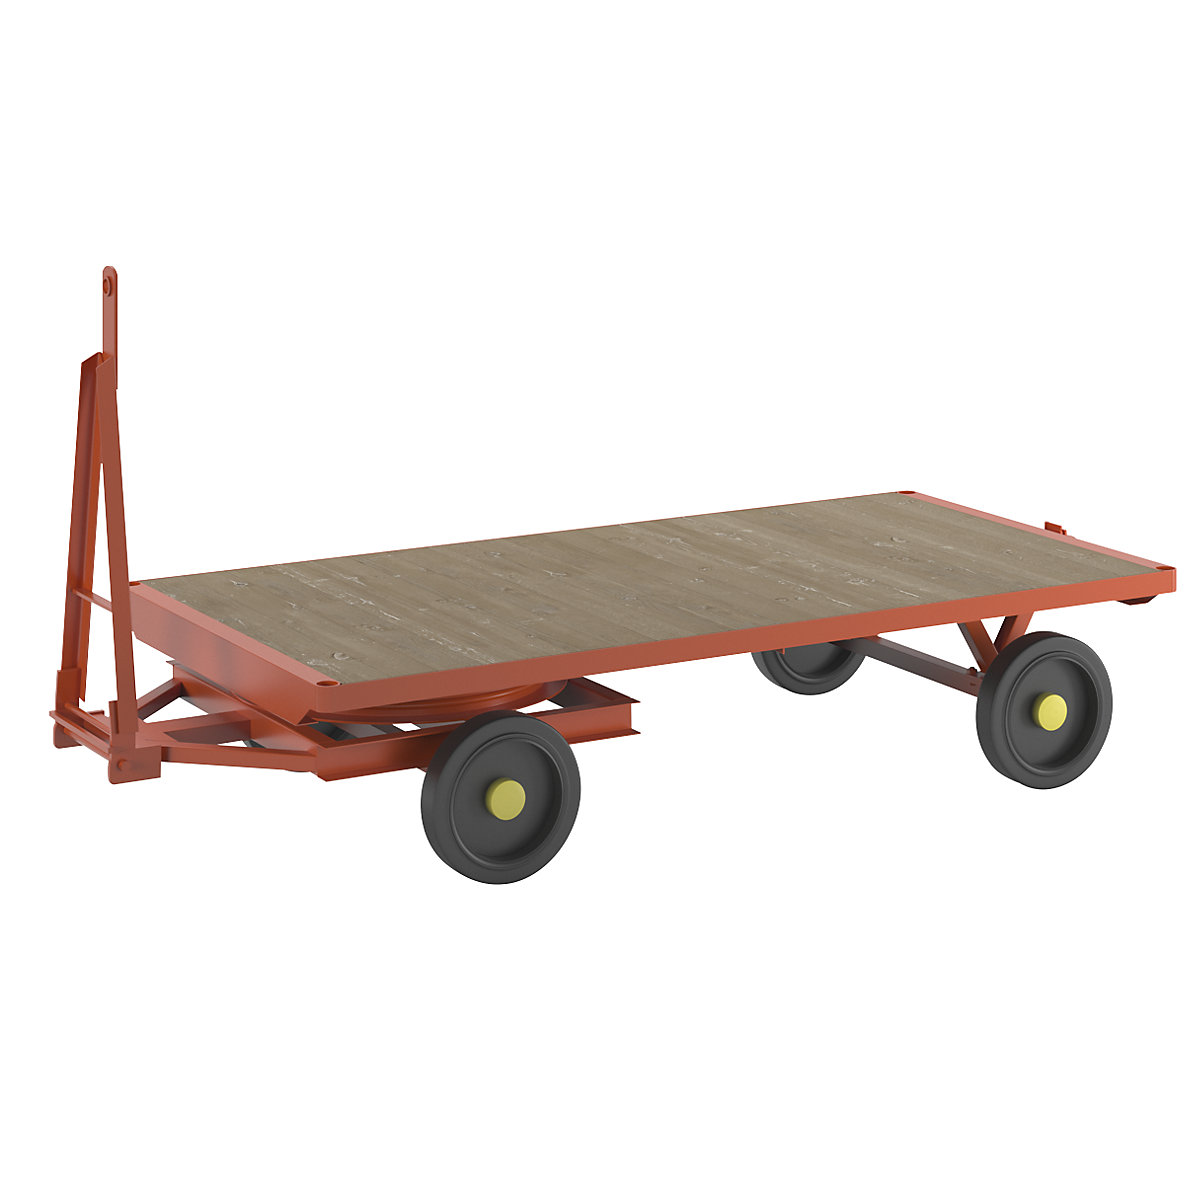 Trailer, 2-wheel turntable steering, max. load 3 t, platform 2.5 x 1.25 m, solid rubber tyres-2